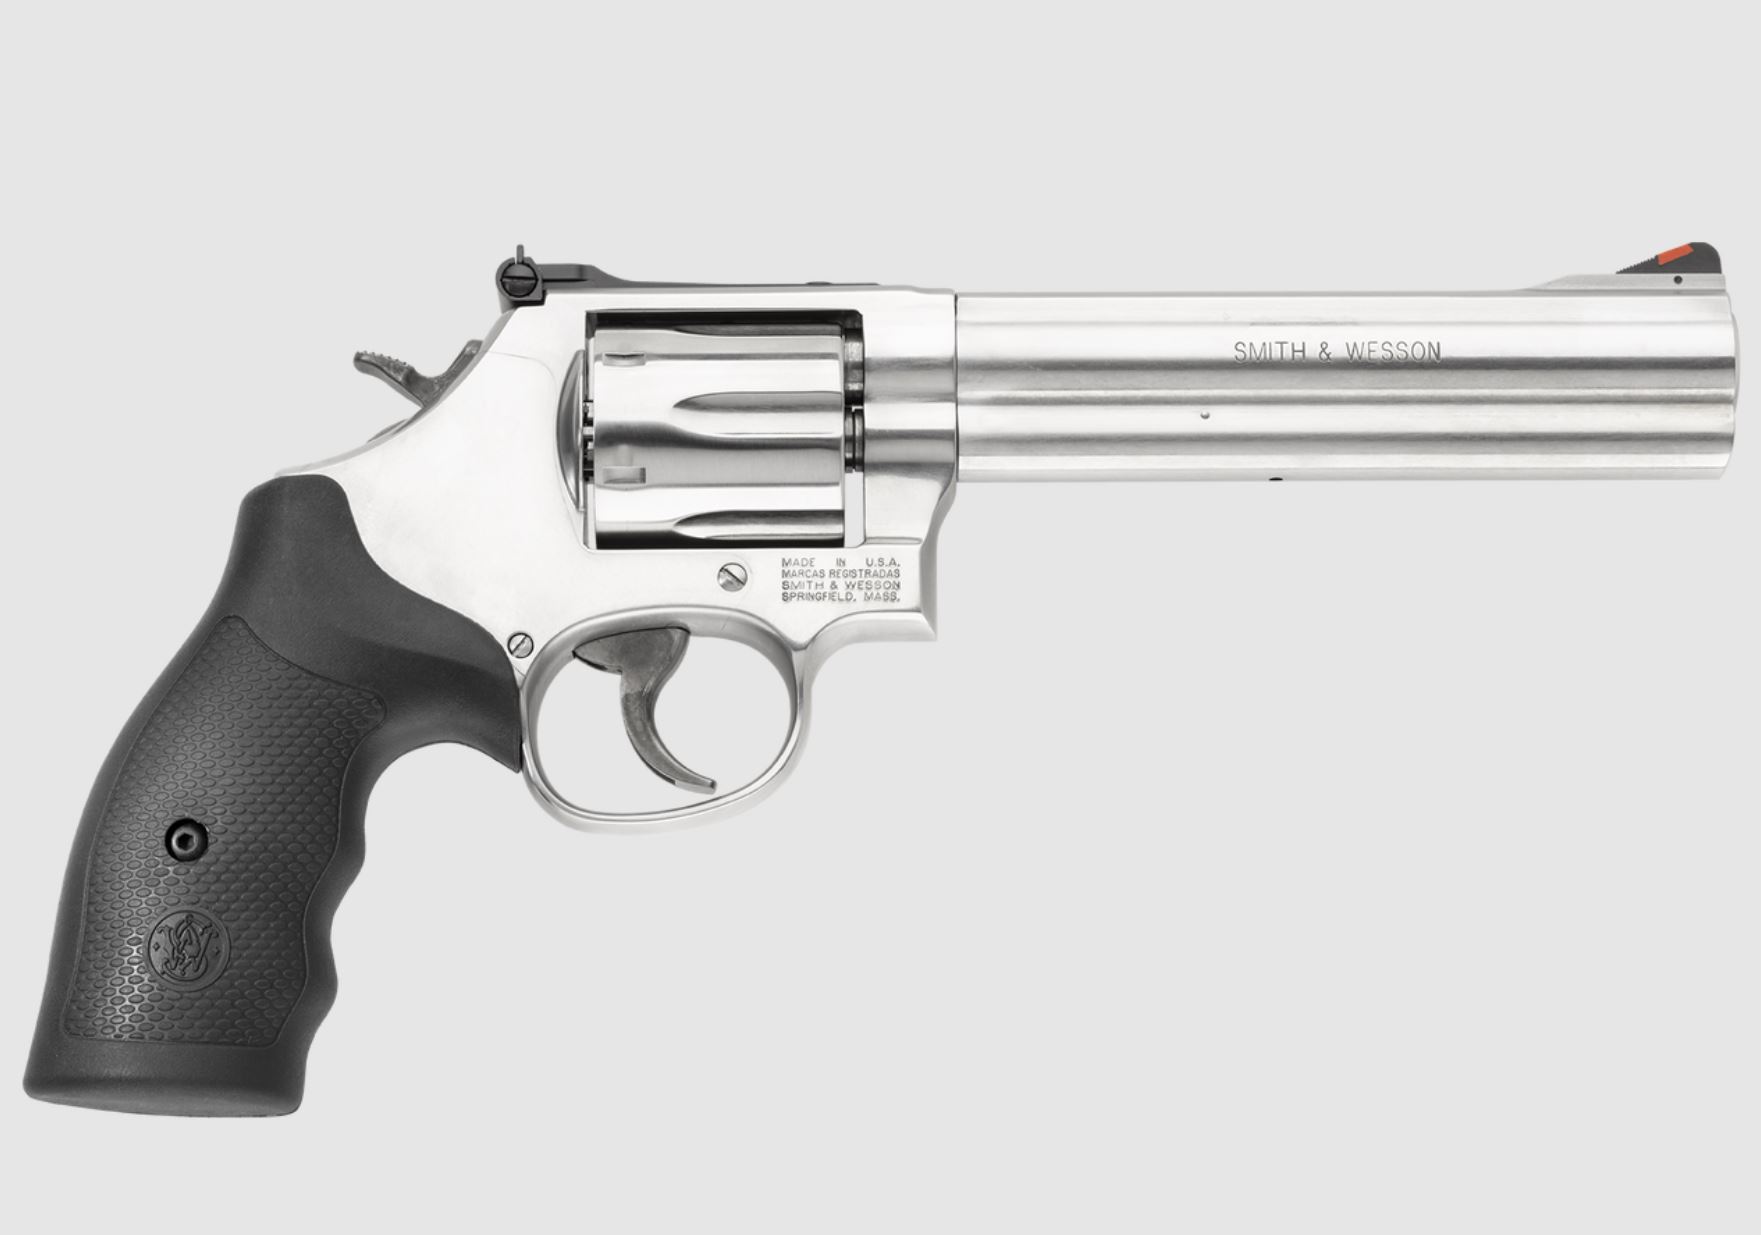 TFB Round Table: Anything Special About 38 Smith & Wesson?The